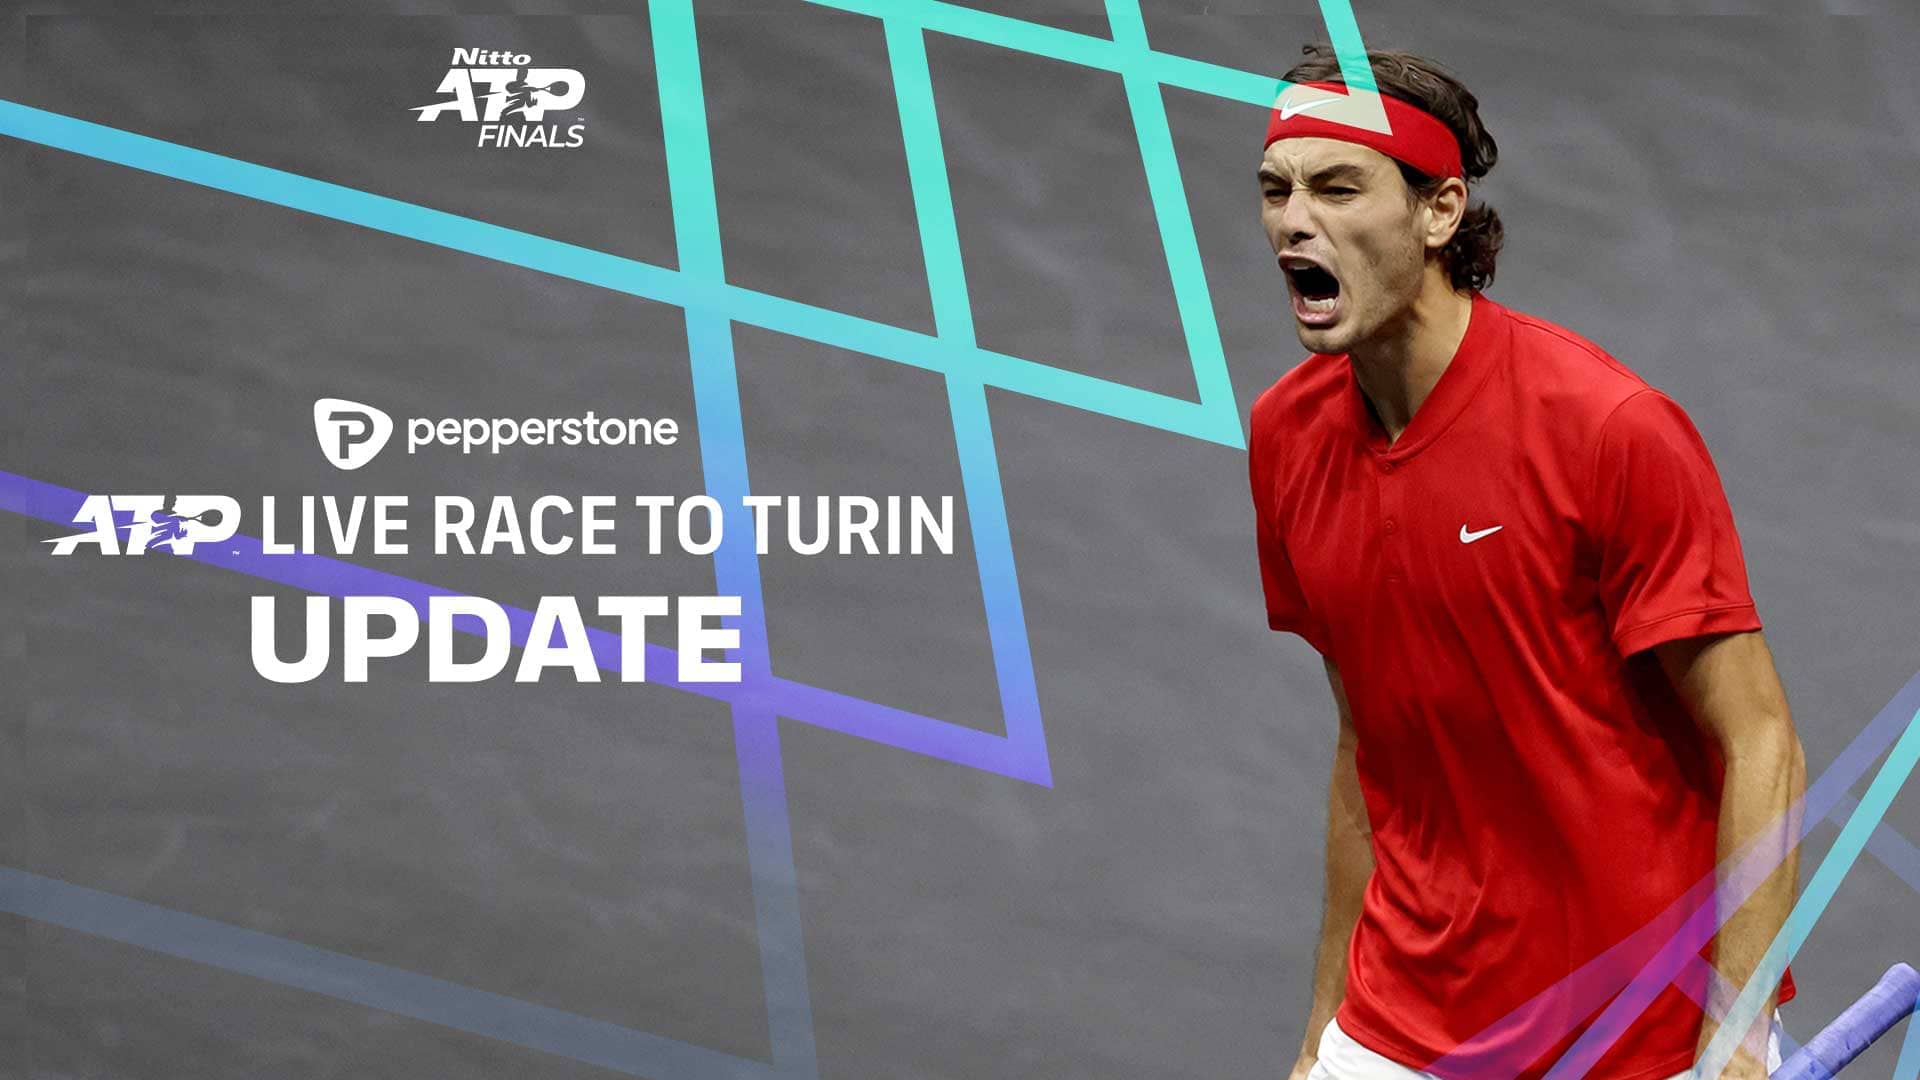 Taylor Fritz, currently 10th in the Pepperstone ATP Live Race To Turin, will compete in Tokyo this week.